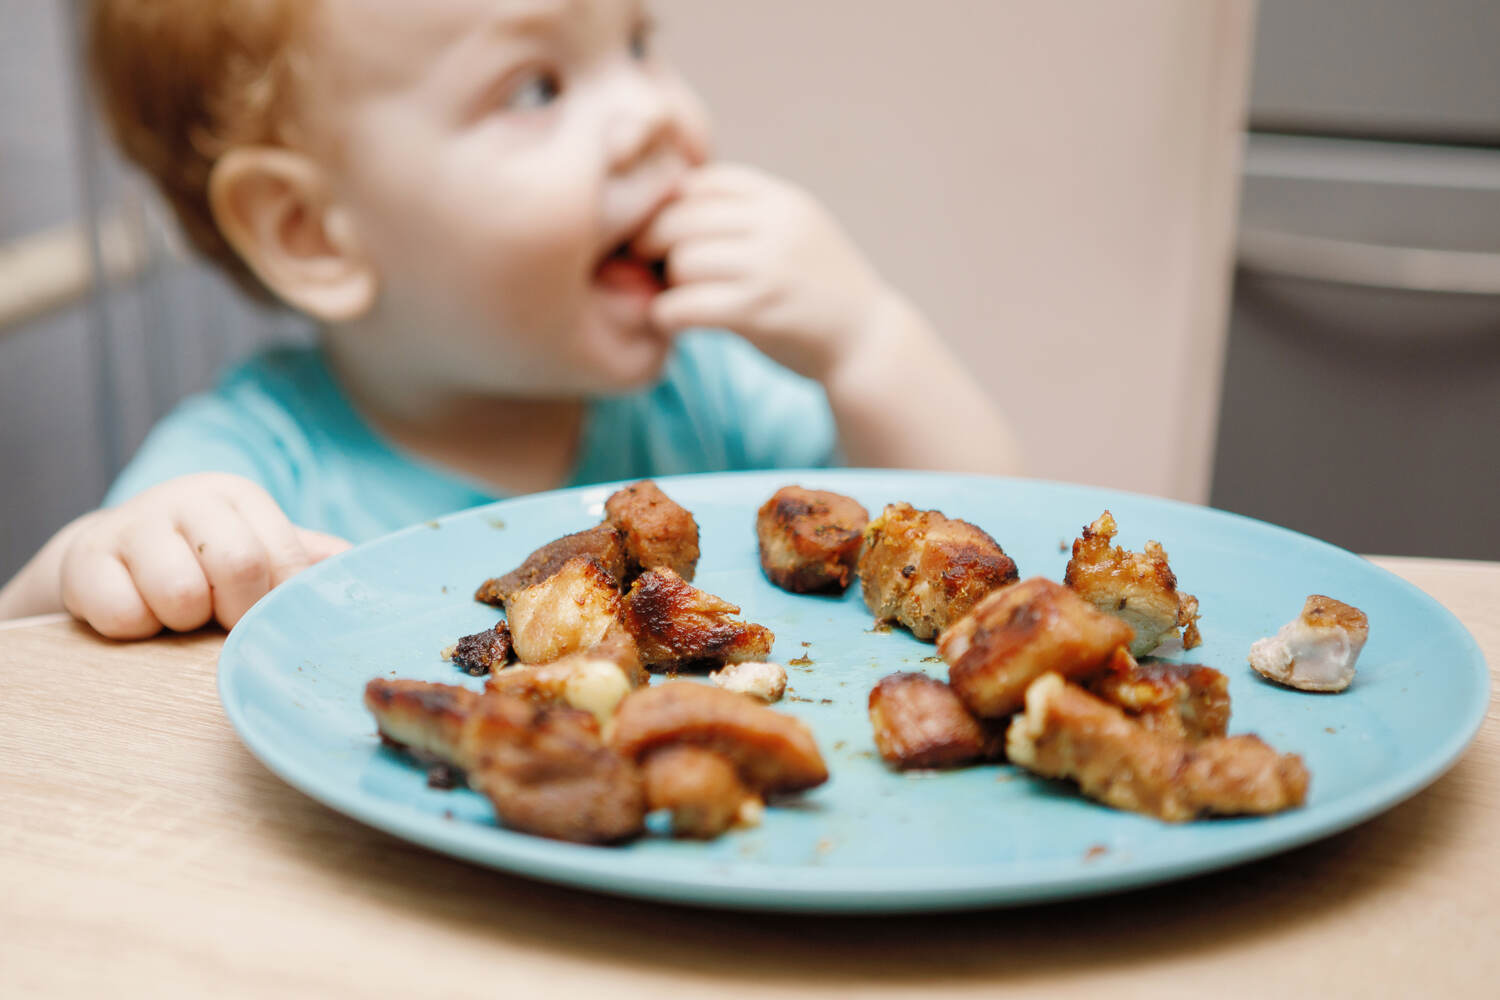 Cut meat into bite sized pieces for toddlers to eat easily